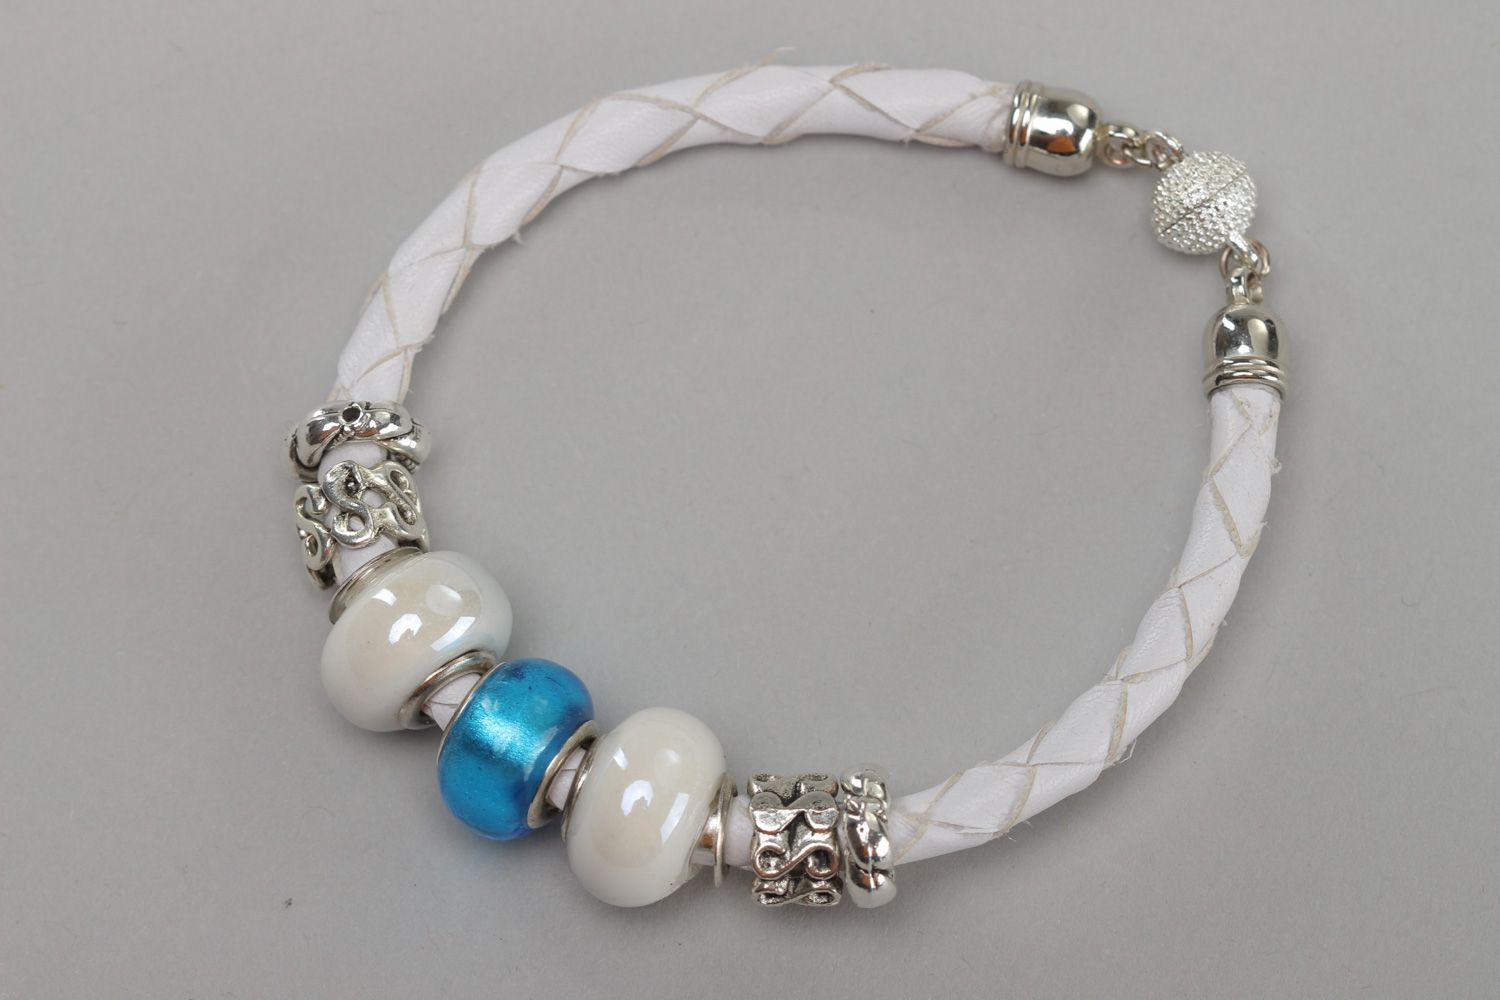 Tender handmade wrist bracelet woven of white faux leather with beads for women photo 2